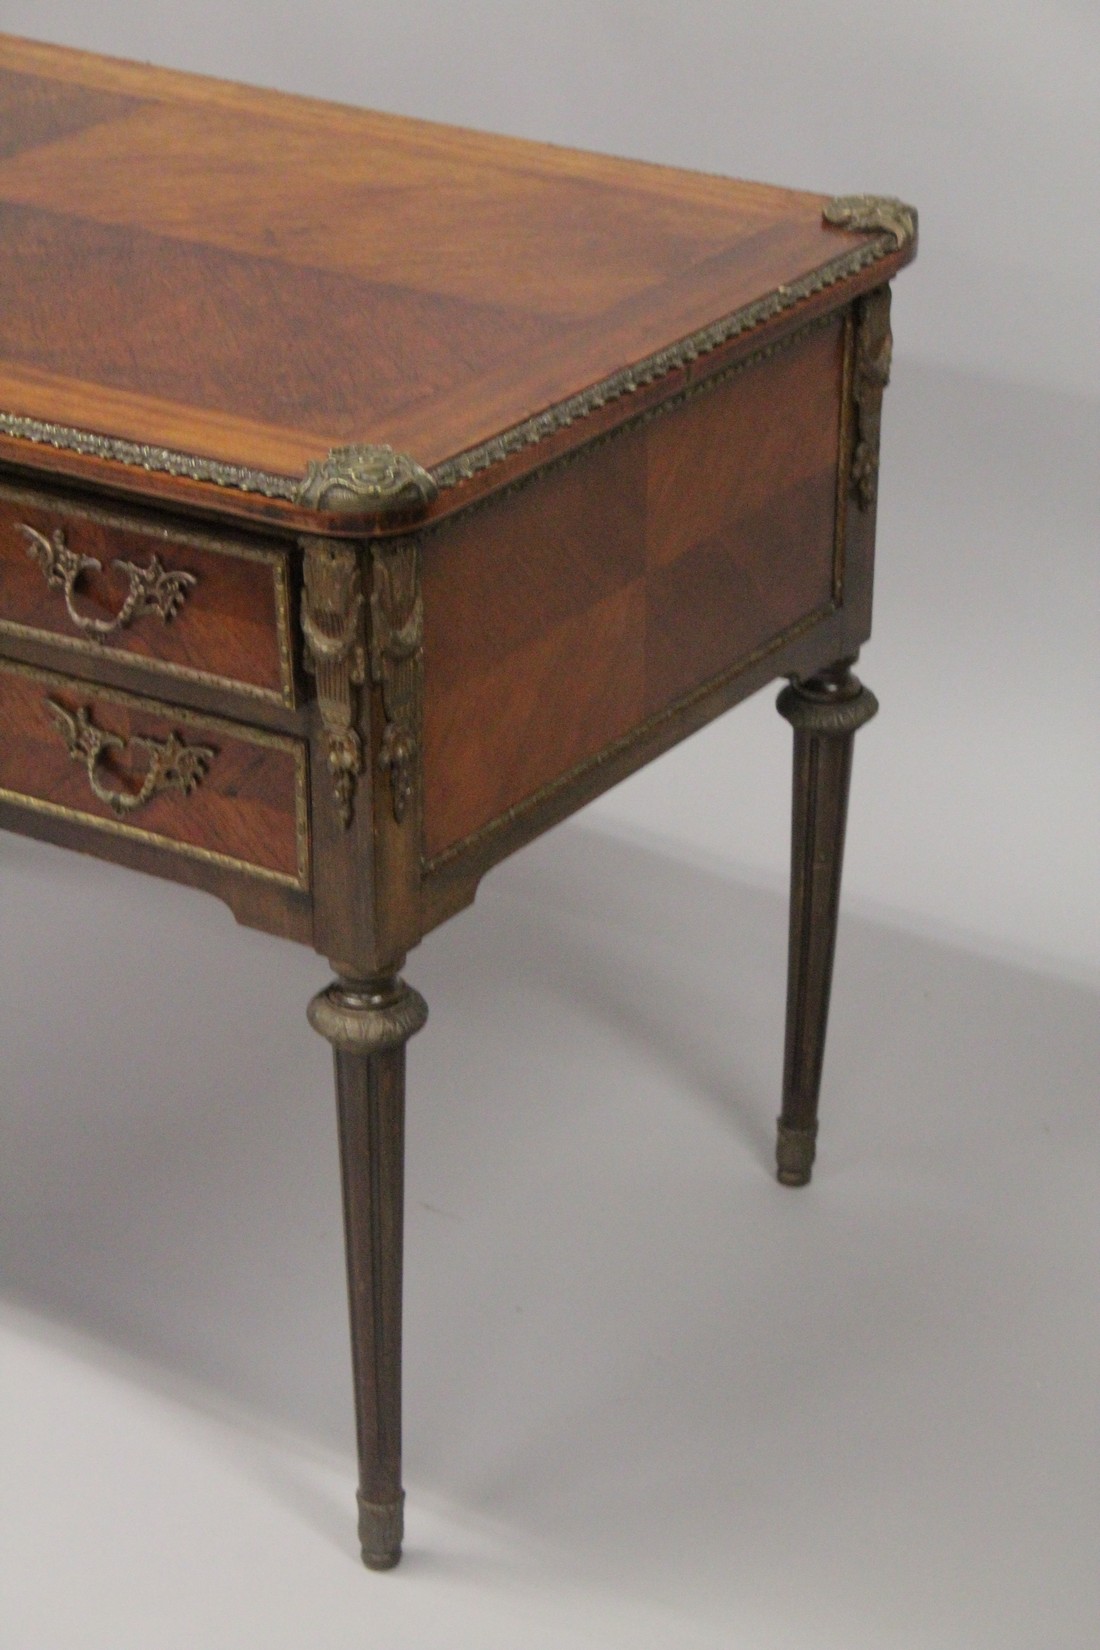 A LOUIS XVITH DESIGN WRITING TABLE with wooden top, five drawers on turned legs with ormolu - Image 7 of 7